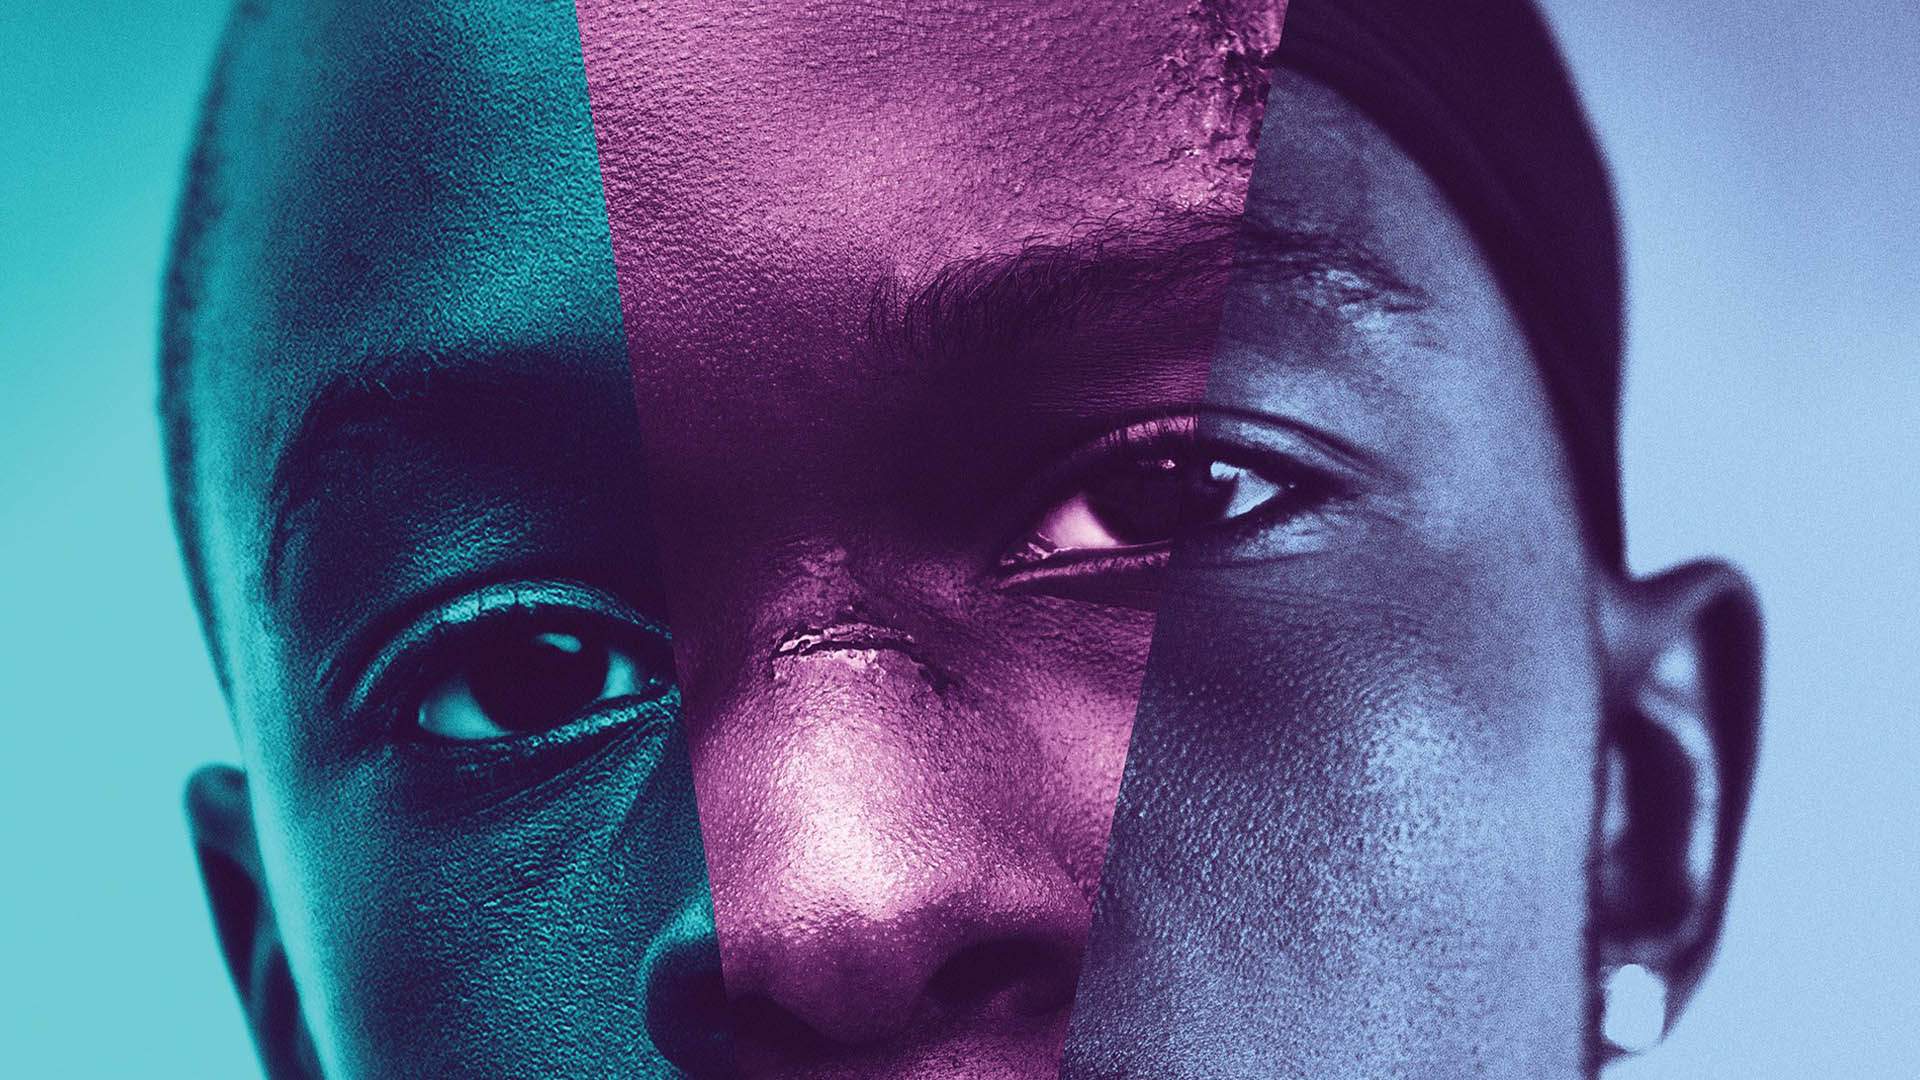 Moonlight movie cover combines three time periods of the main character's face